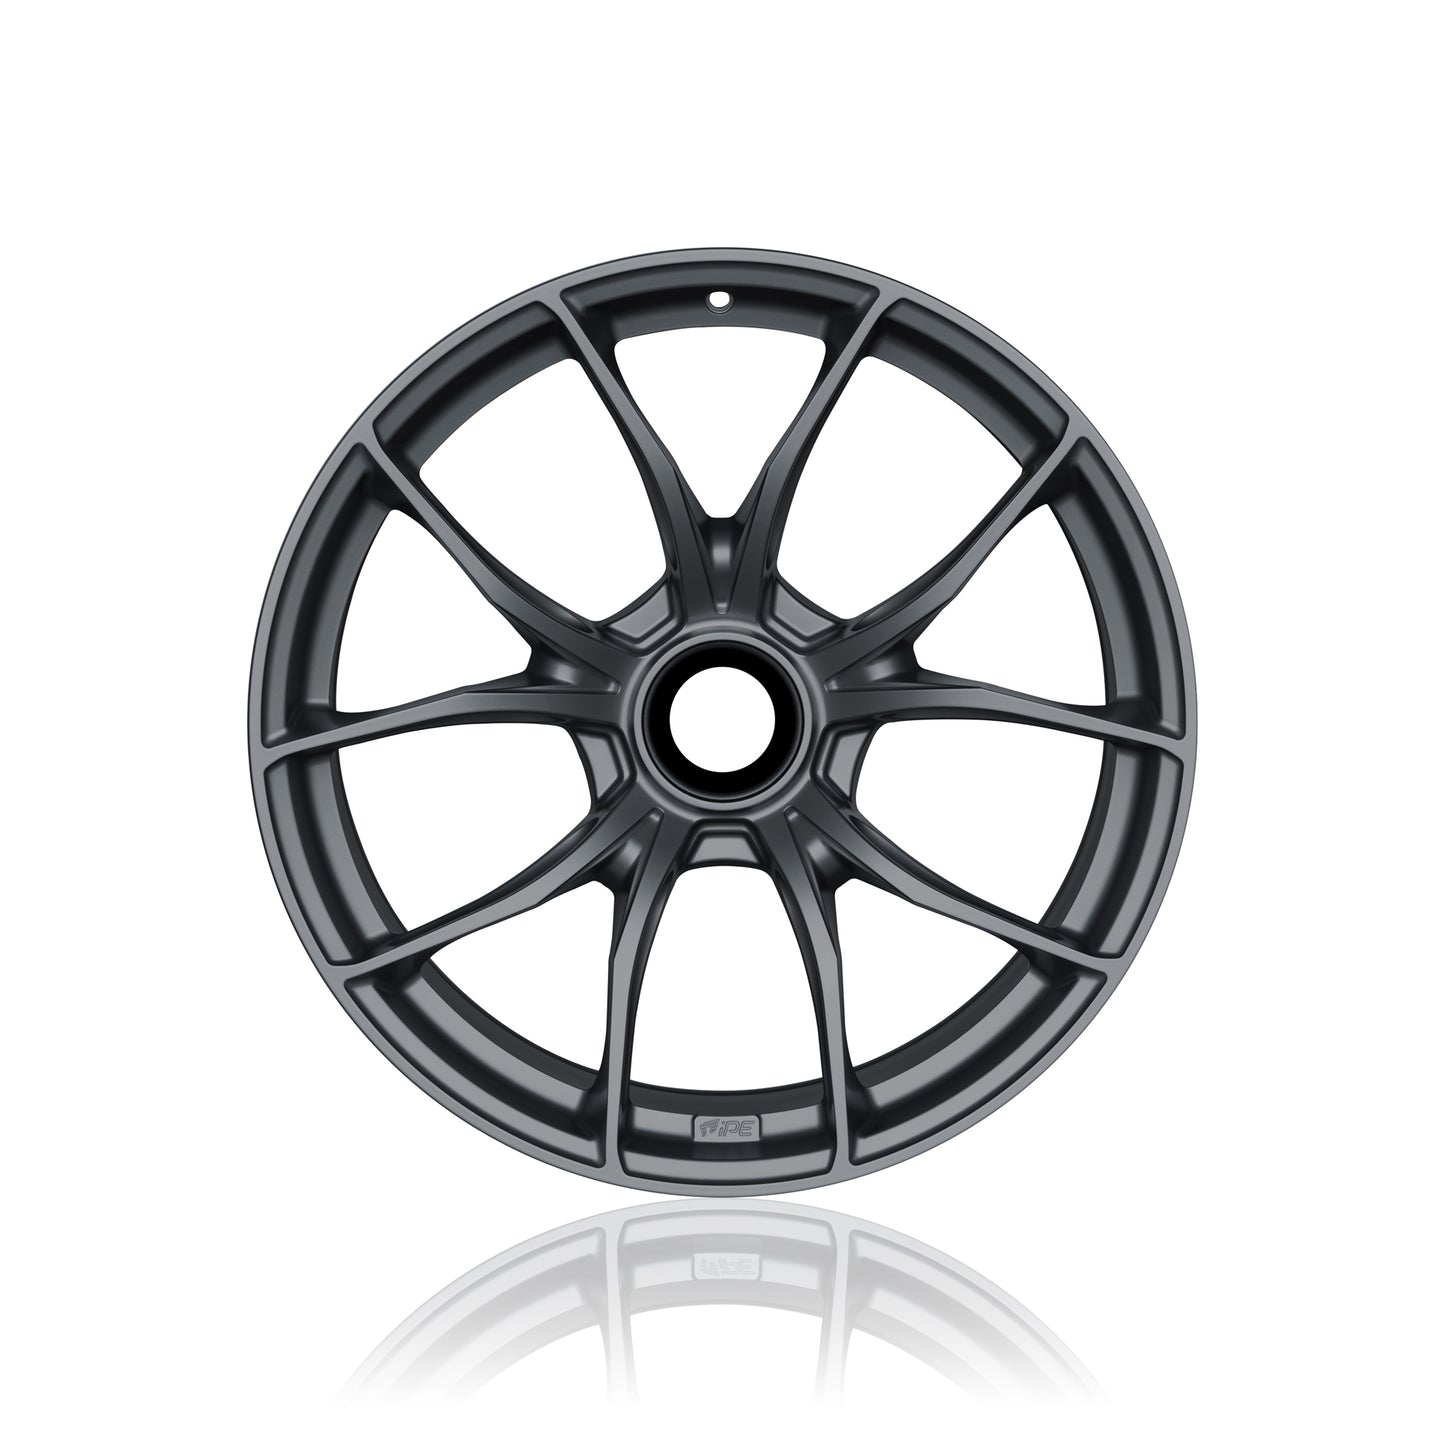 Front view of an anthracite IPE MFR-01 Magnesium wheel on a white background